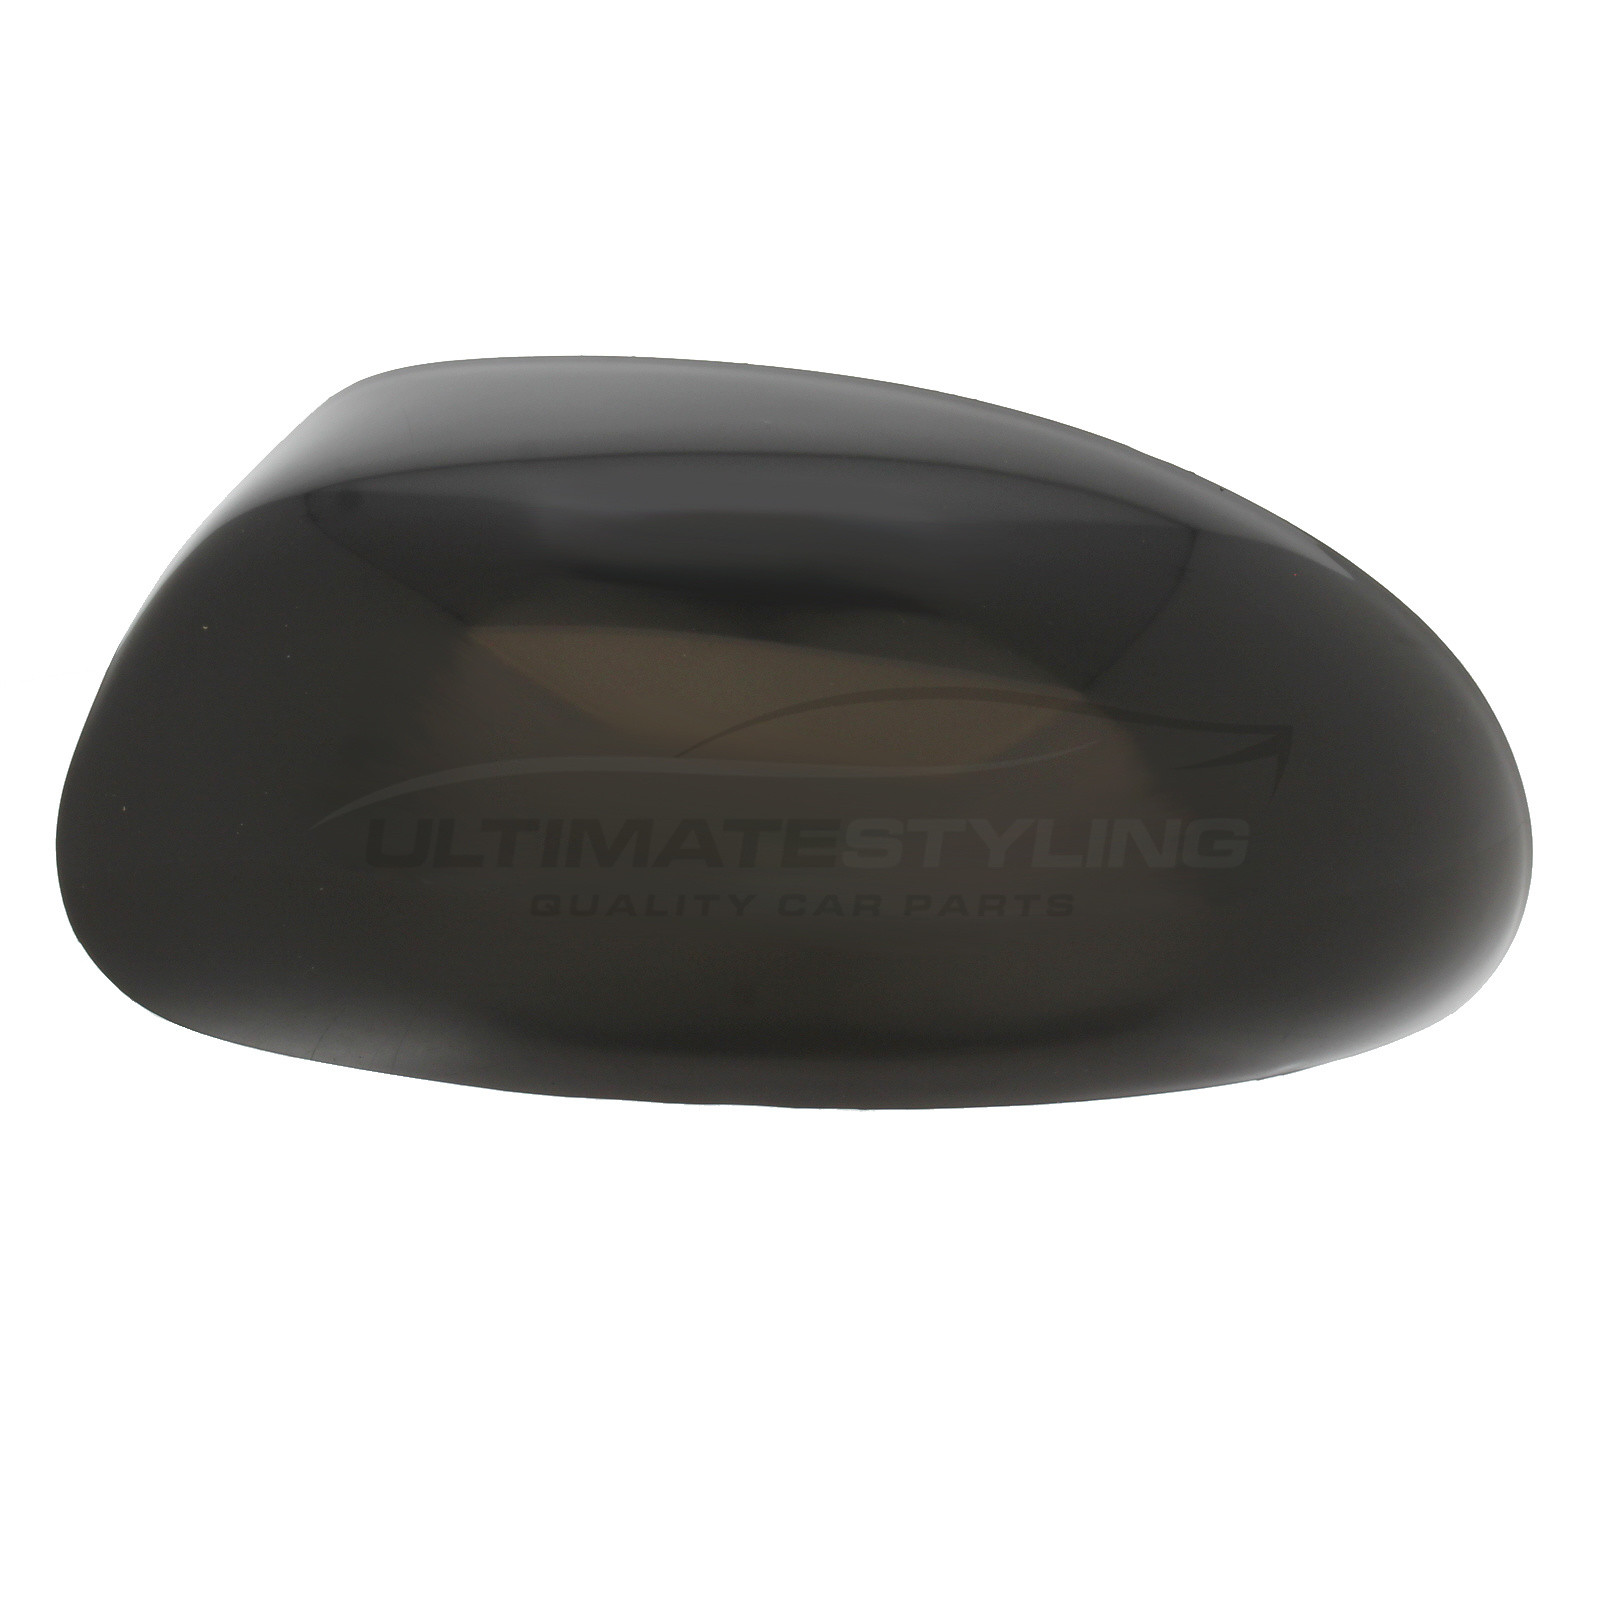 Ford Focus 1998-2005 Wing Mirror Cover Cap Casing Black (Textured) Drivers Side (RH)